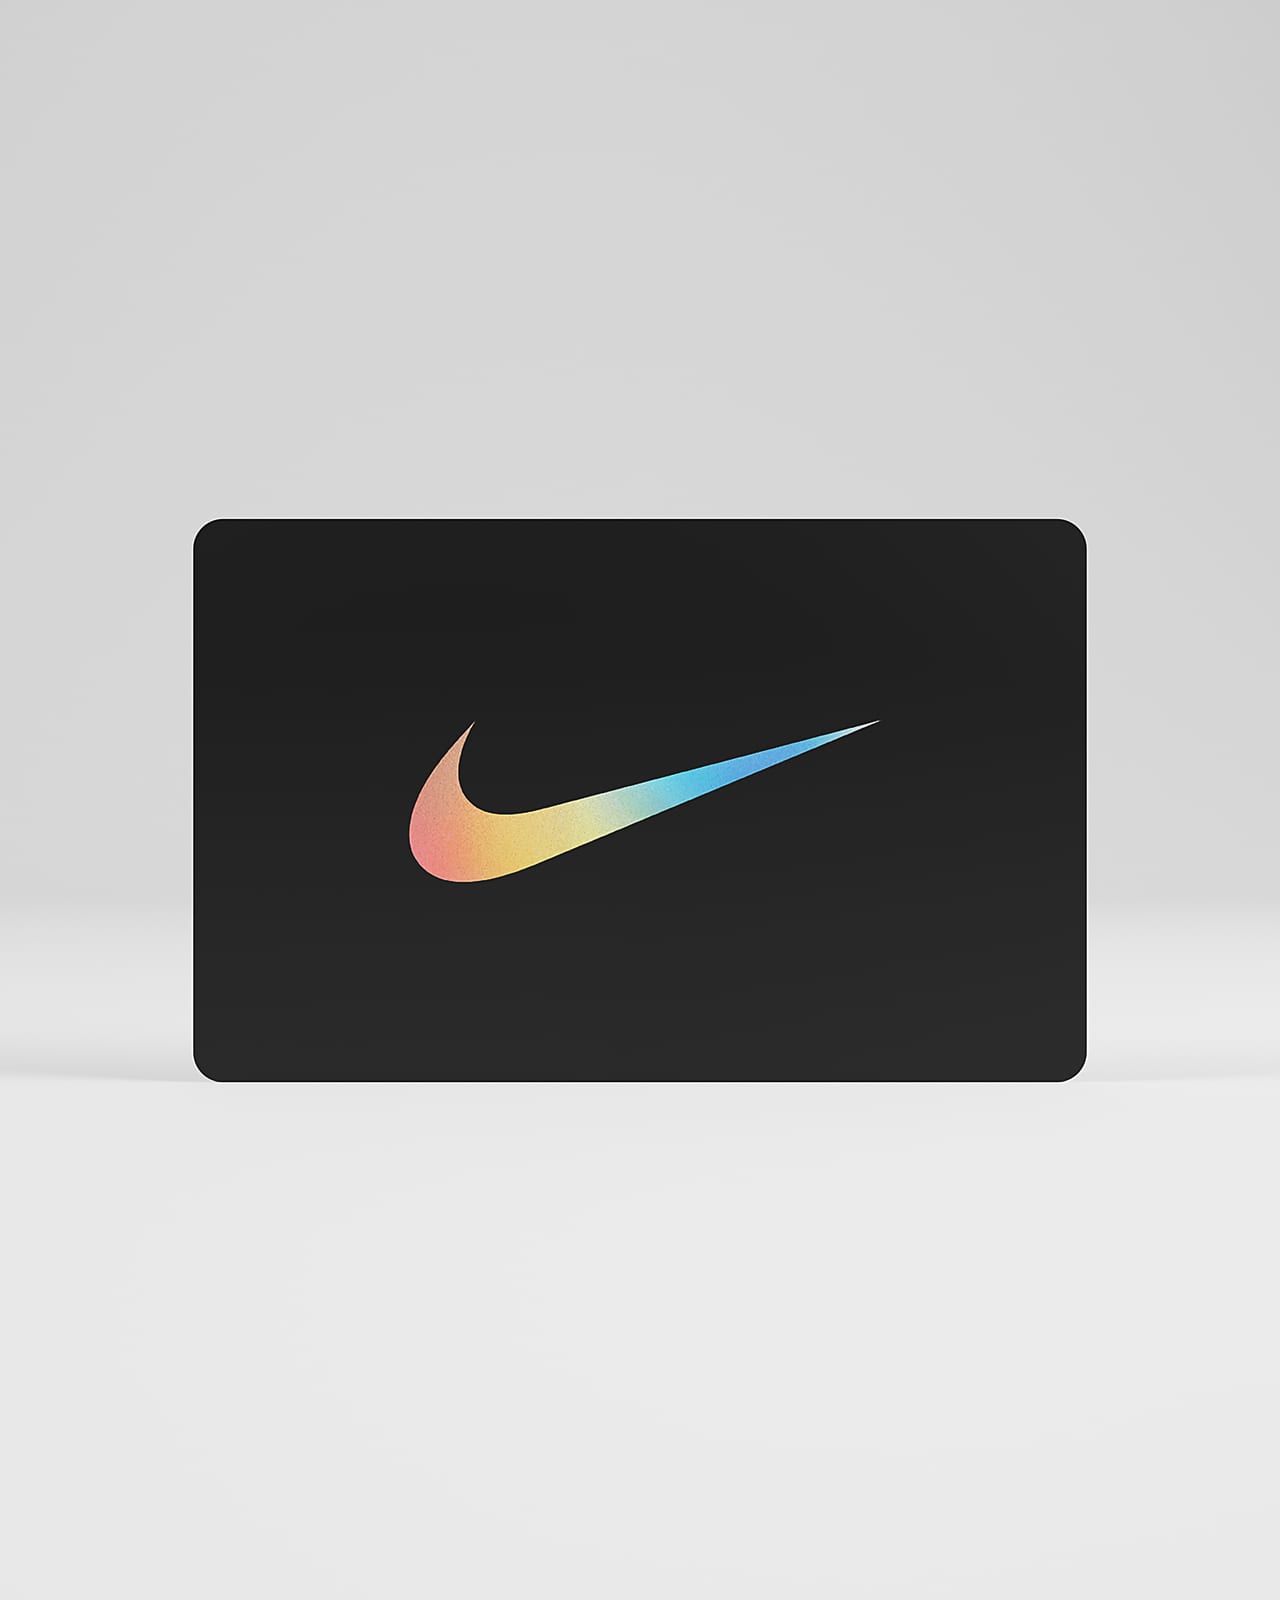 Nike Digital Gift Card Emailed in 2 Hours or Less.